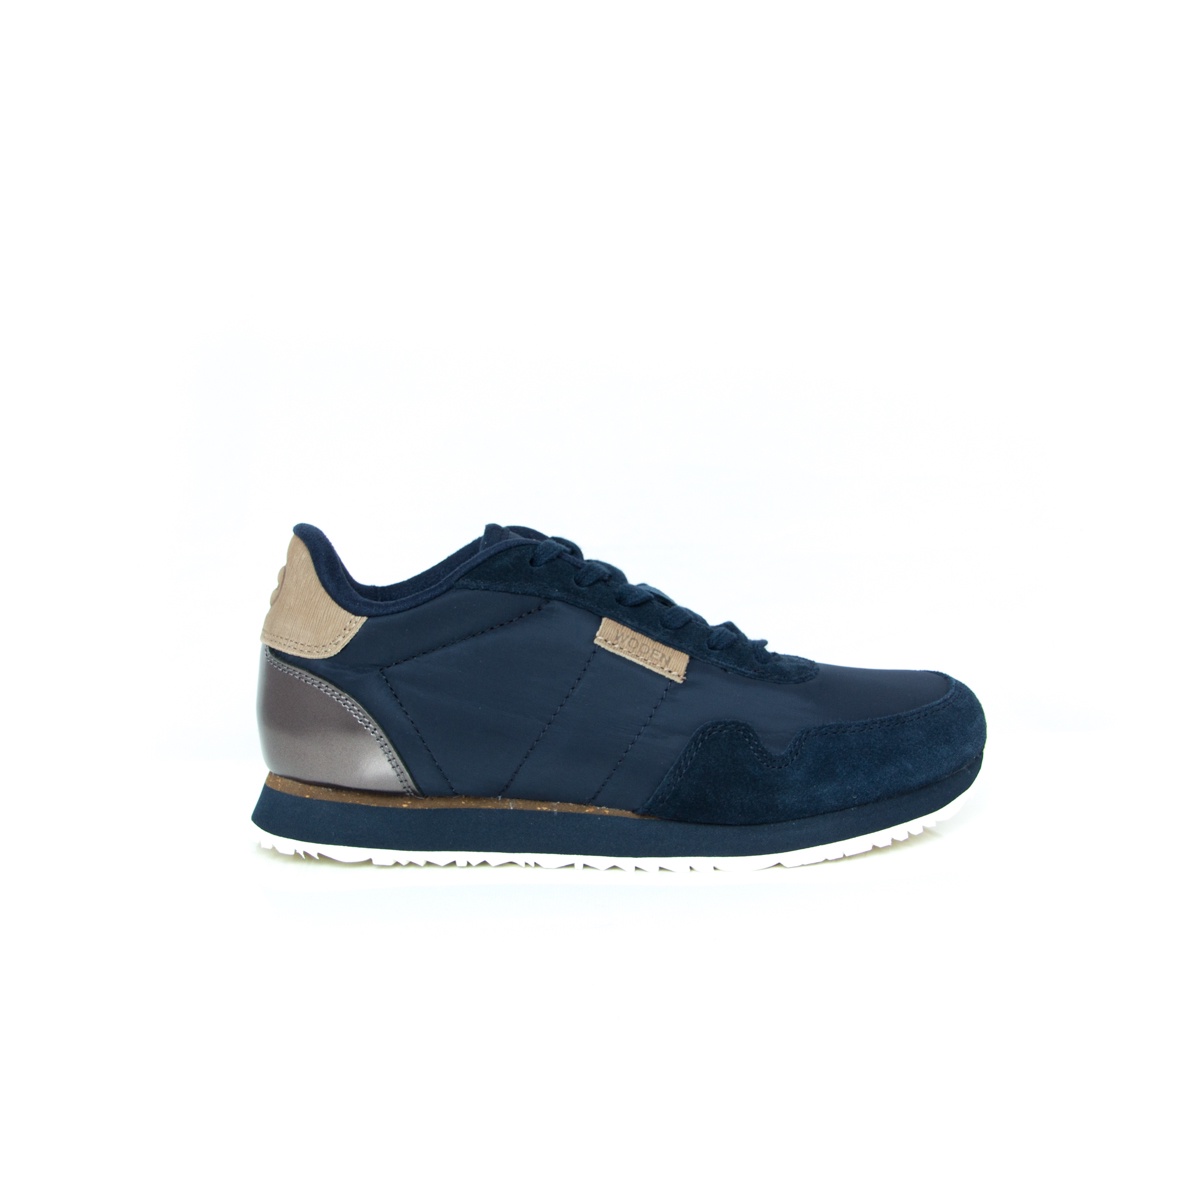 Woden Navy - Shoes